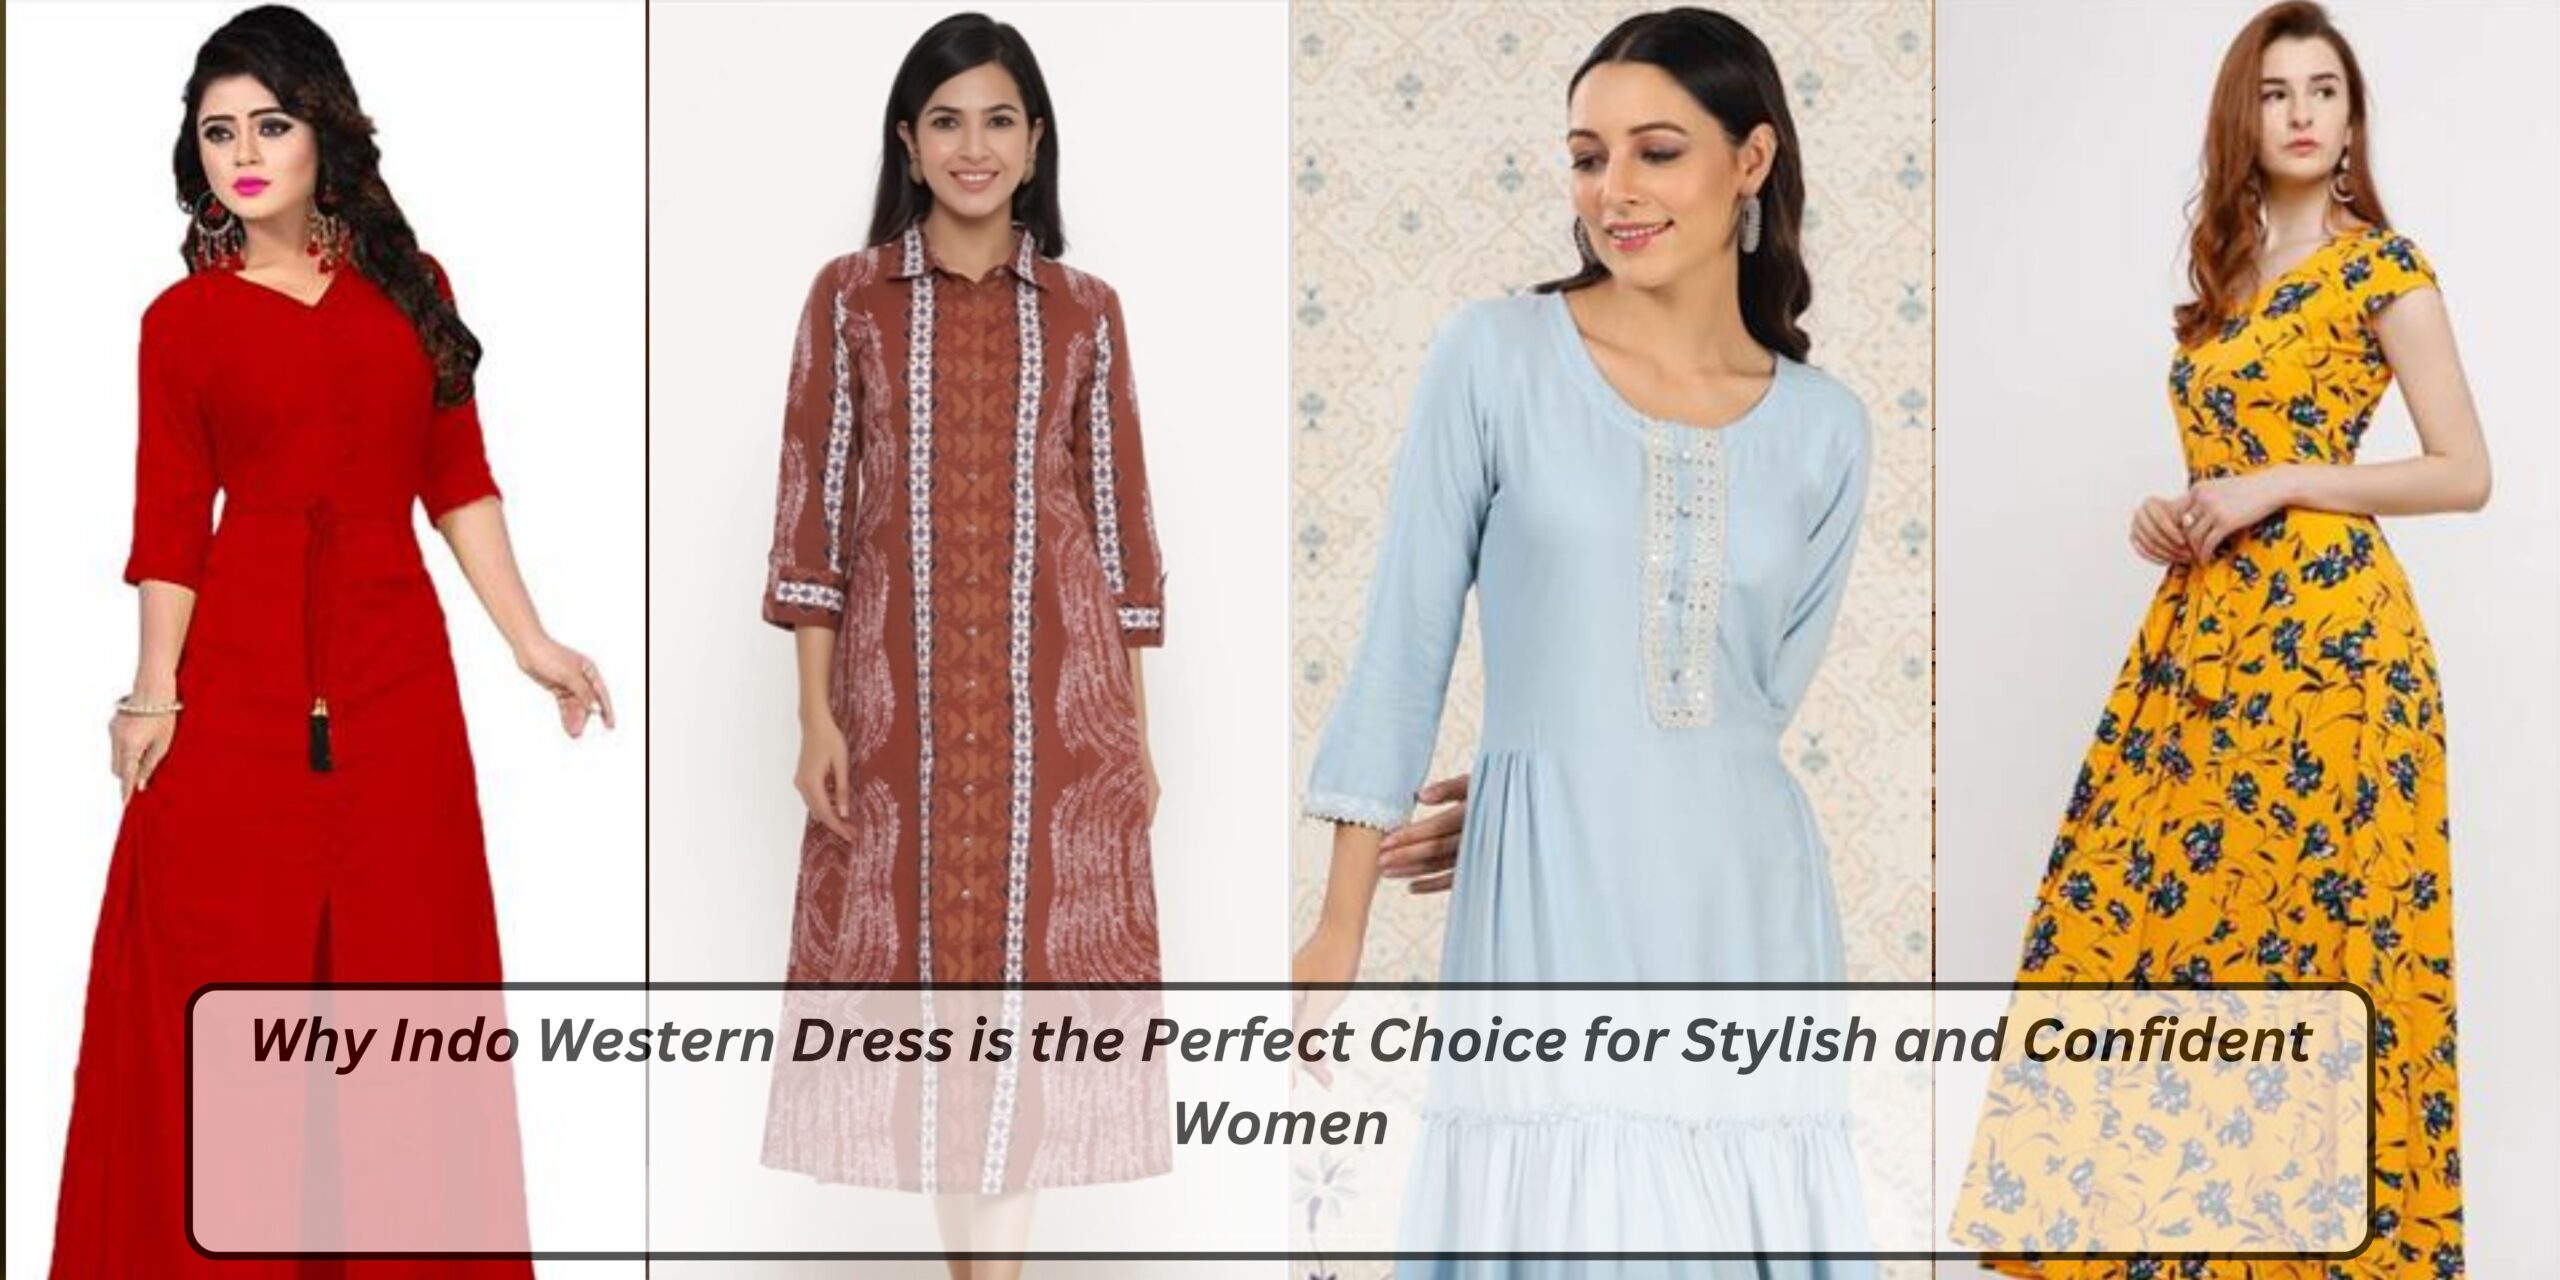 Why Indo Western Dress is the Perfect Choice for Stylish and Confident Women